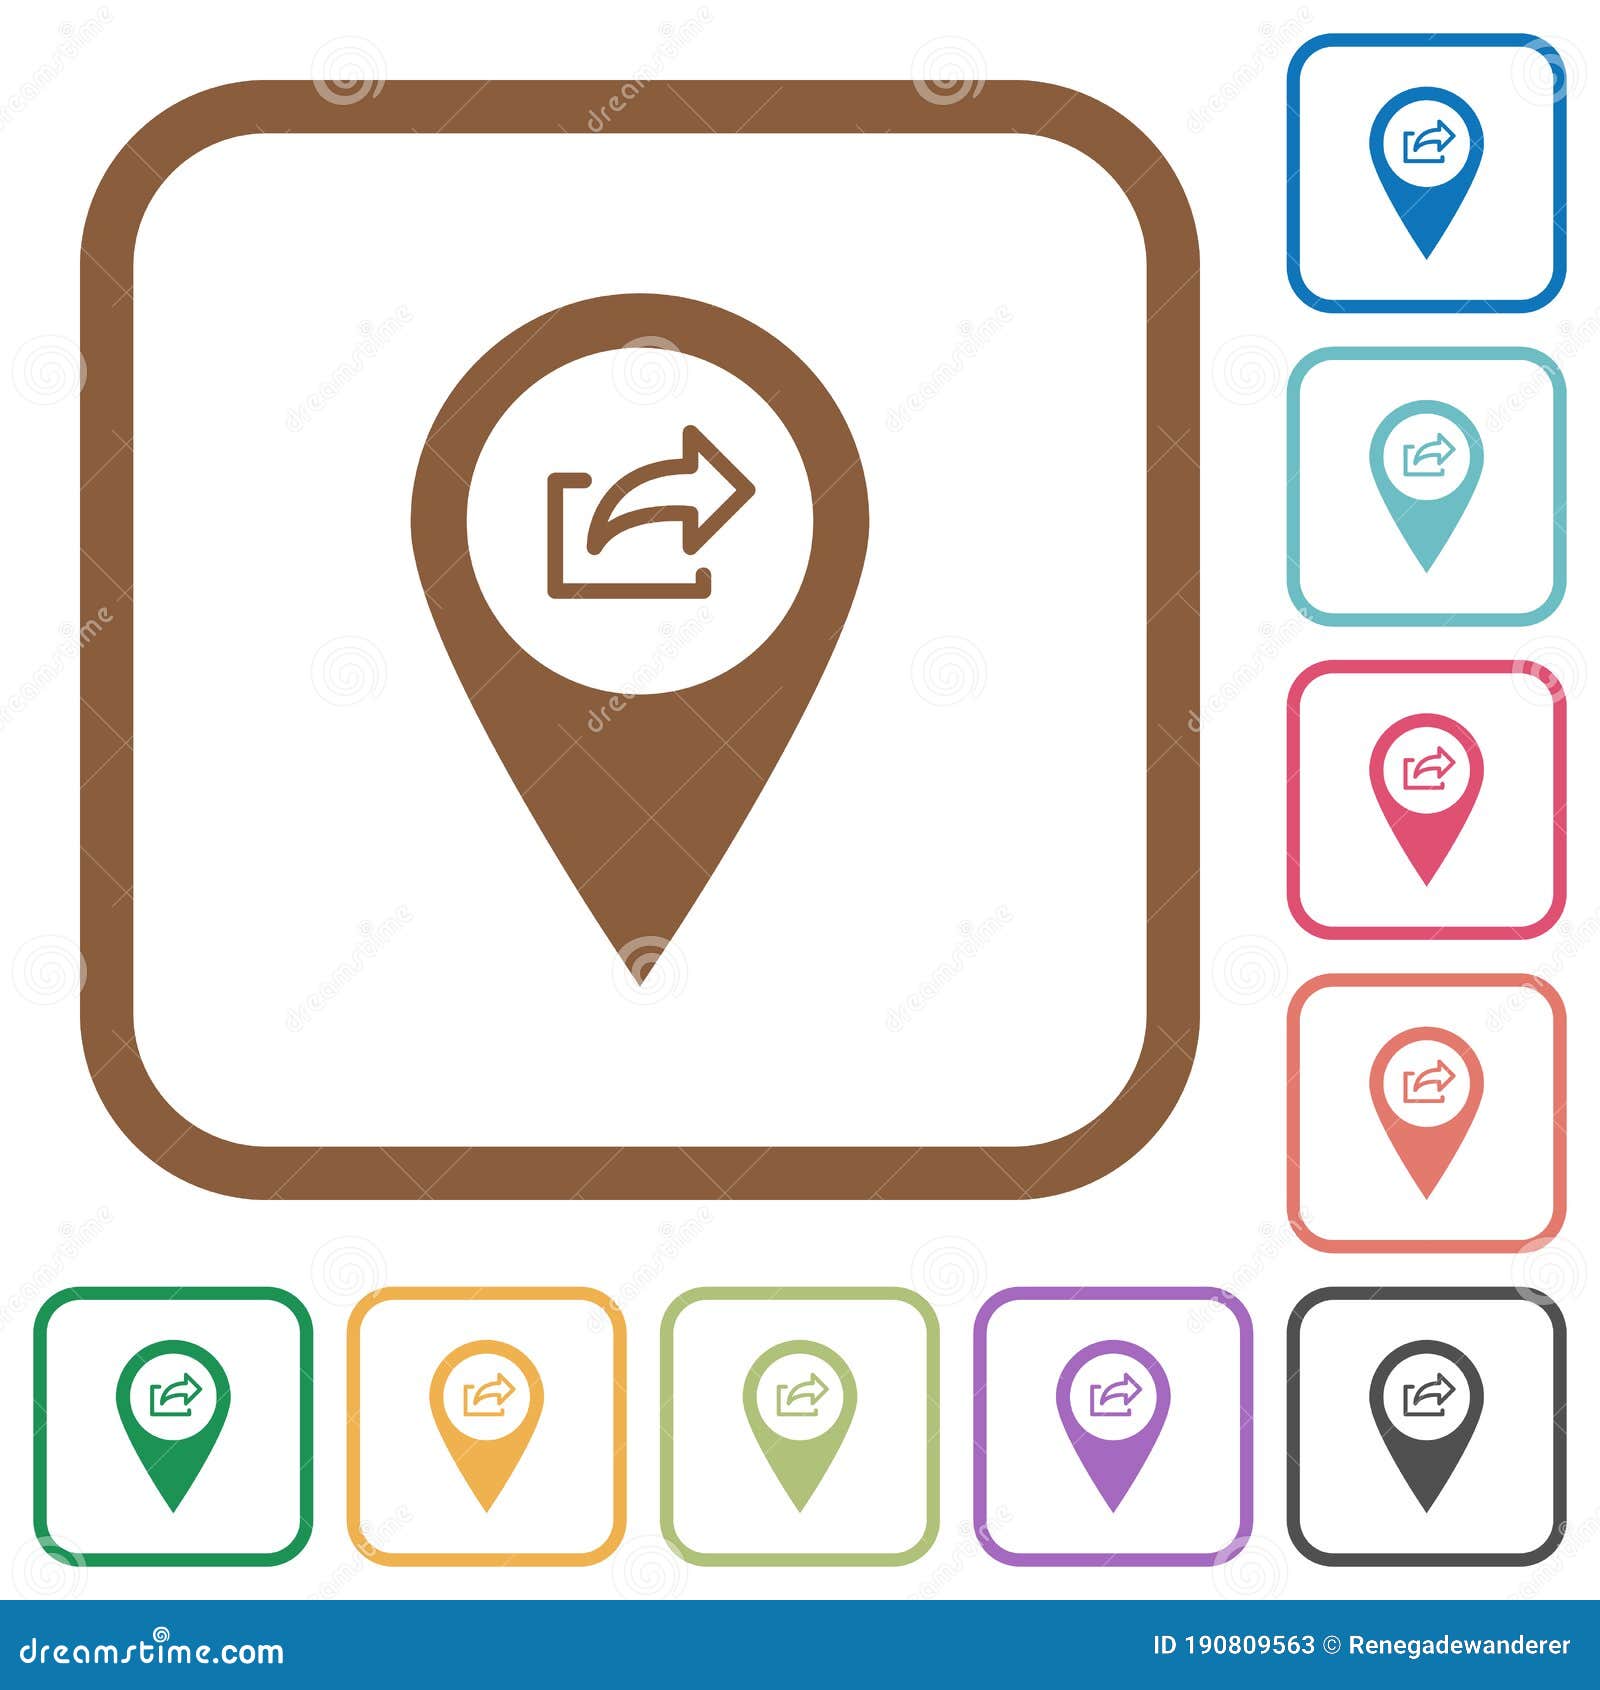 Export GPS Map Location Simple Icons Stock Vector - Illustration of  template, frames: 190809563